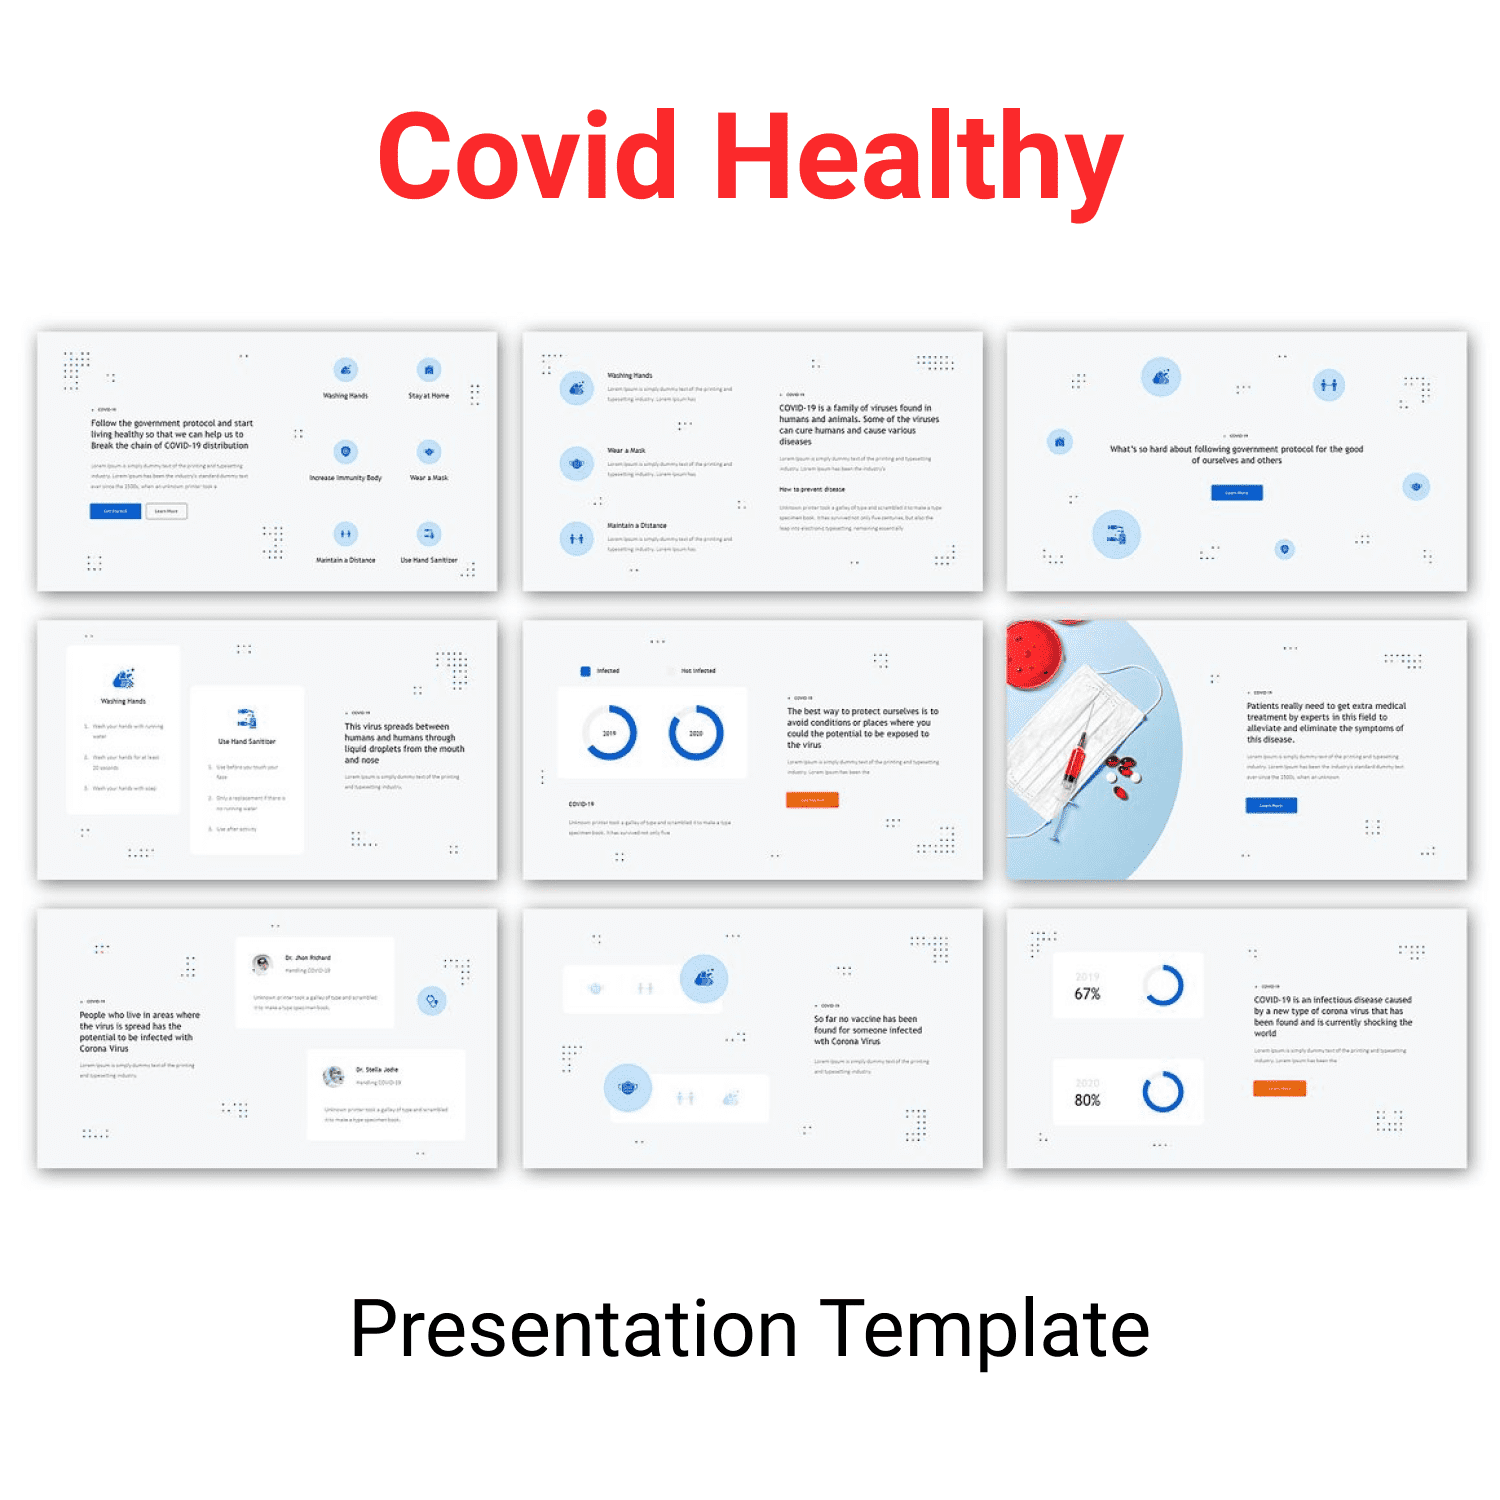 Covid Healthy Presentation Template cover image.